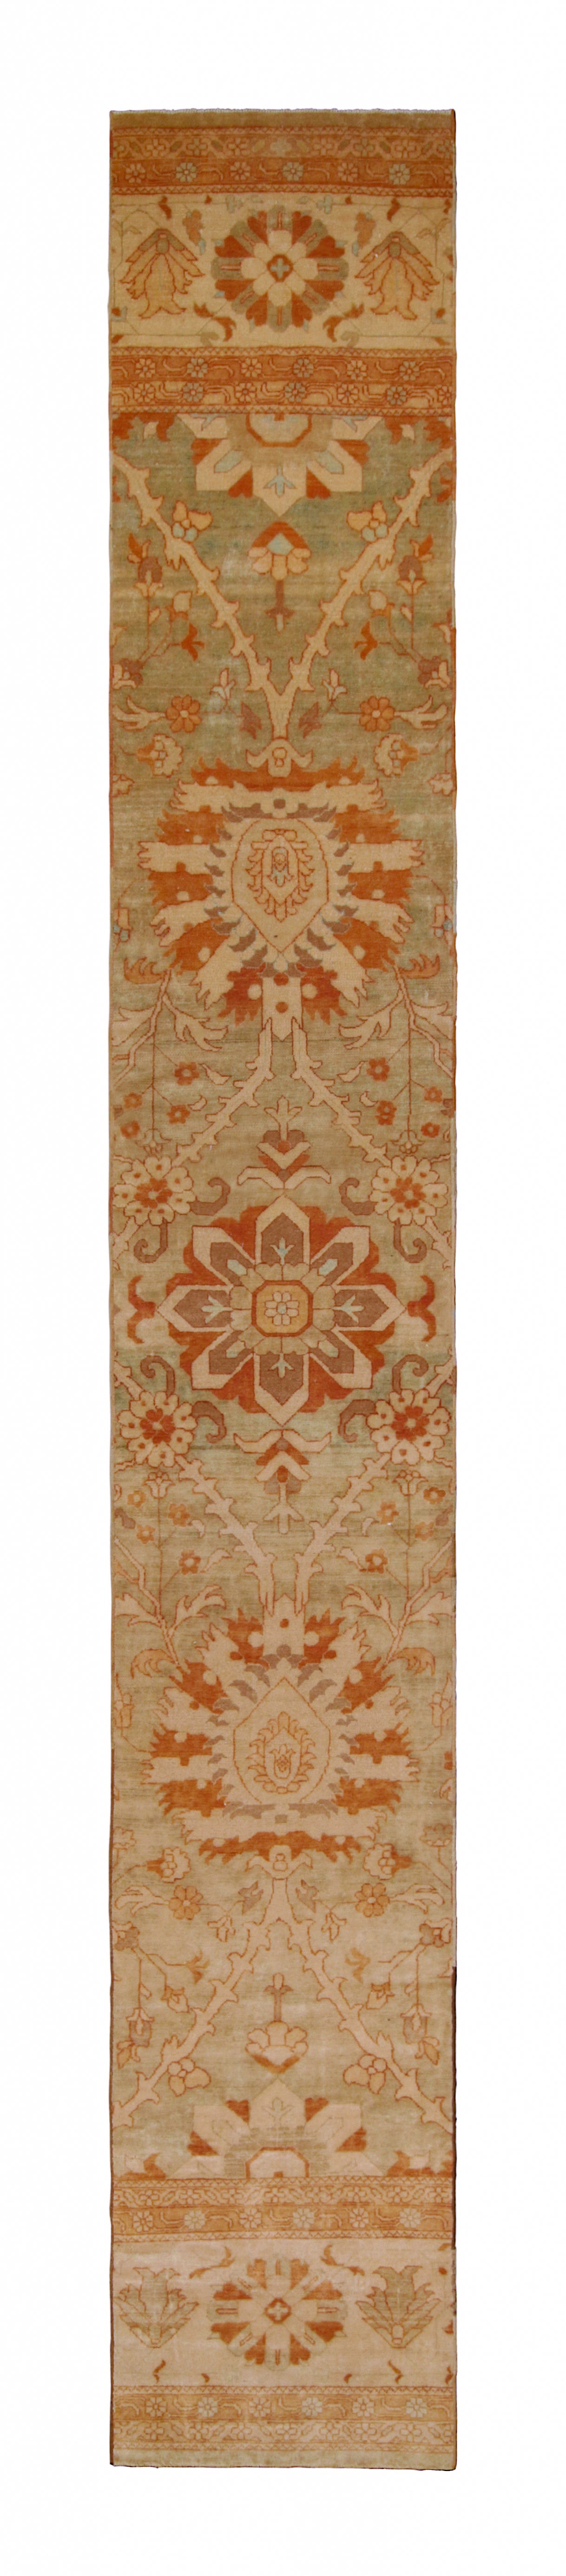 Rug & Kilim’s Persian style Runner in Beige, Blue & Red Floral Pattern For Sale